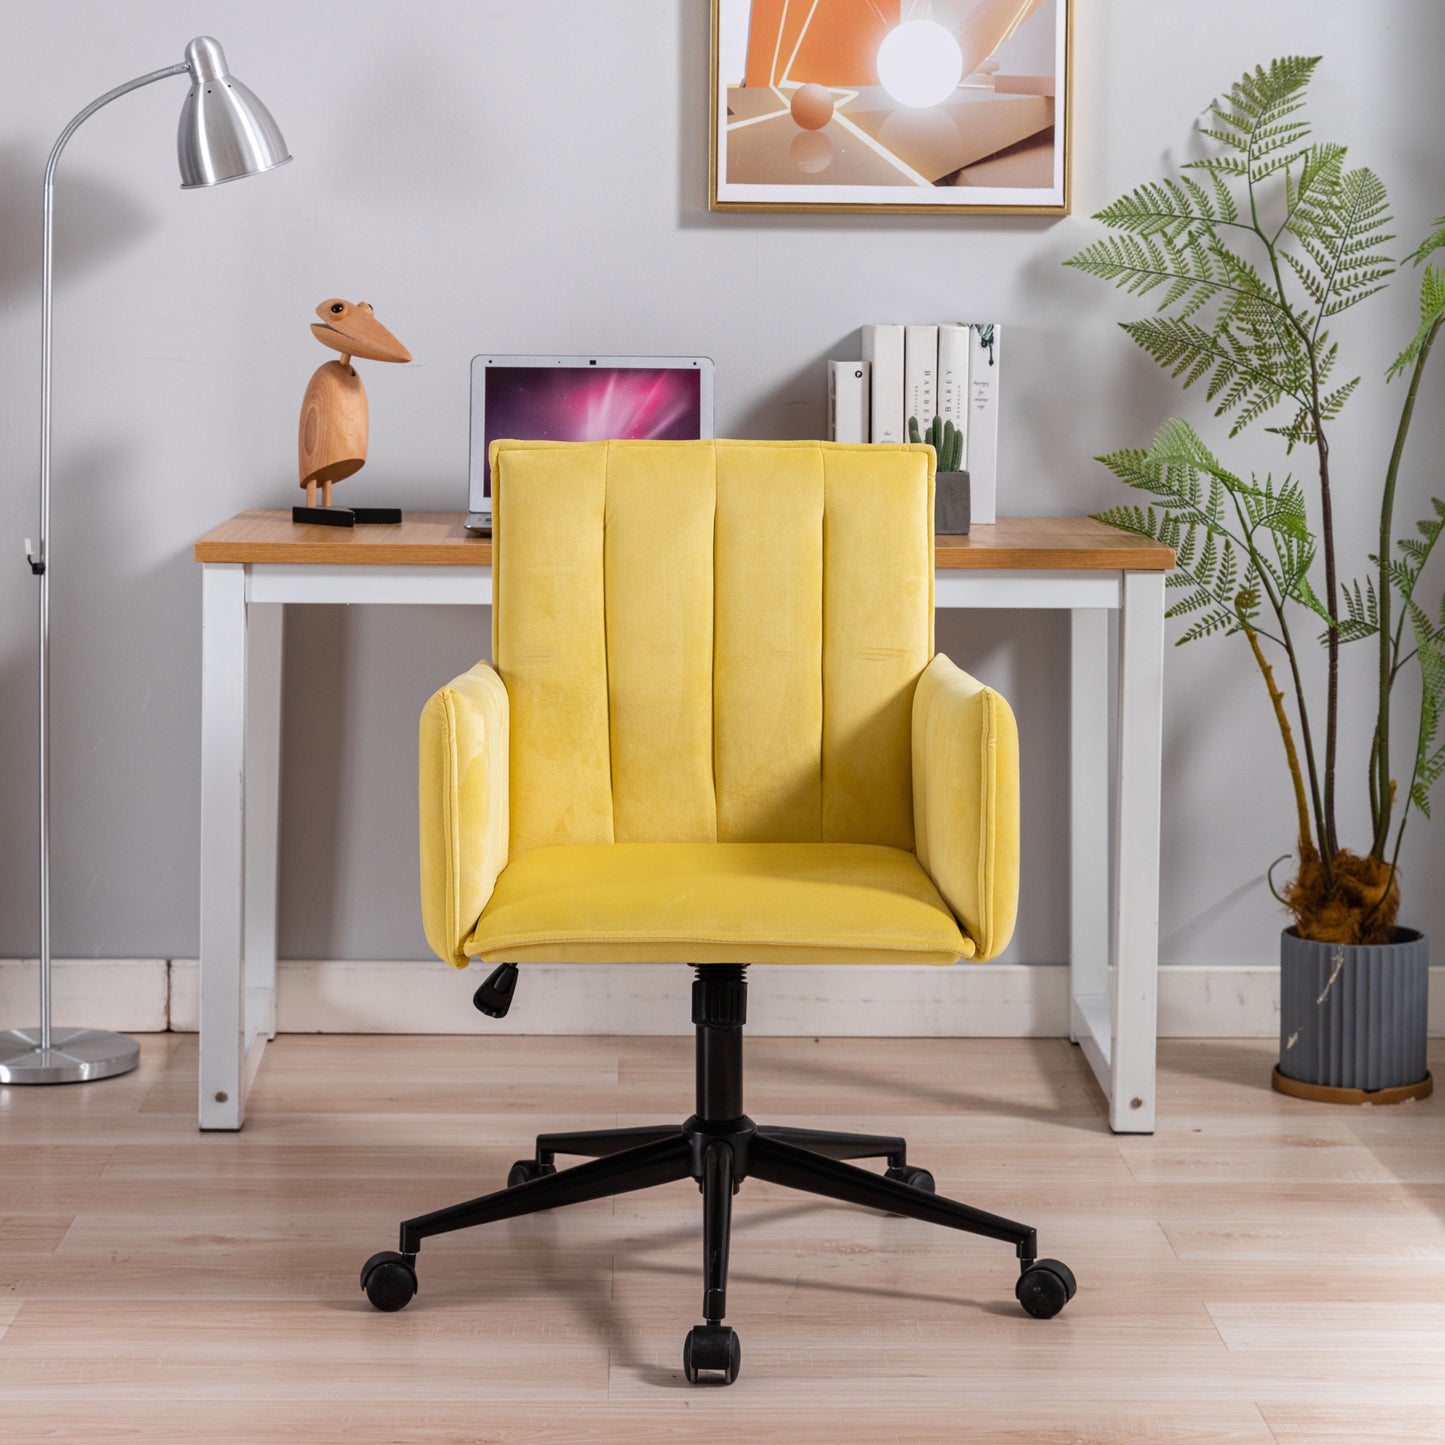 Home Office Desk Chairs, Computer Desk Chair Modern Leisure Chair Velvet Upholstered Chair with Adjustable Height, Comfortable Swivel Rolling Chair for Office Study Bedroom Living Room, Yellow